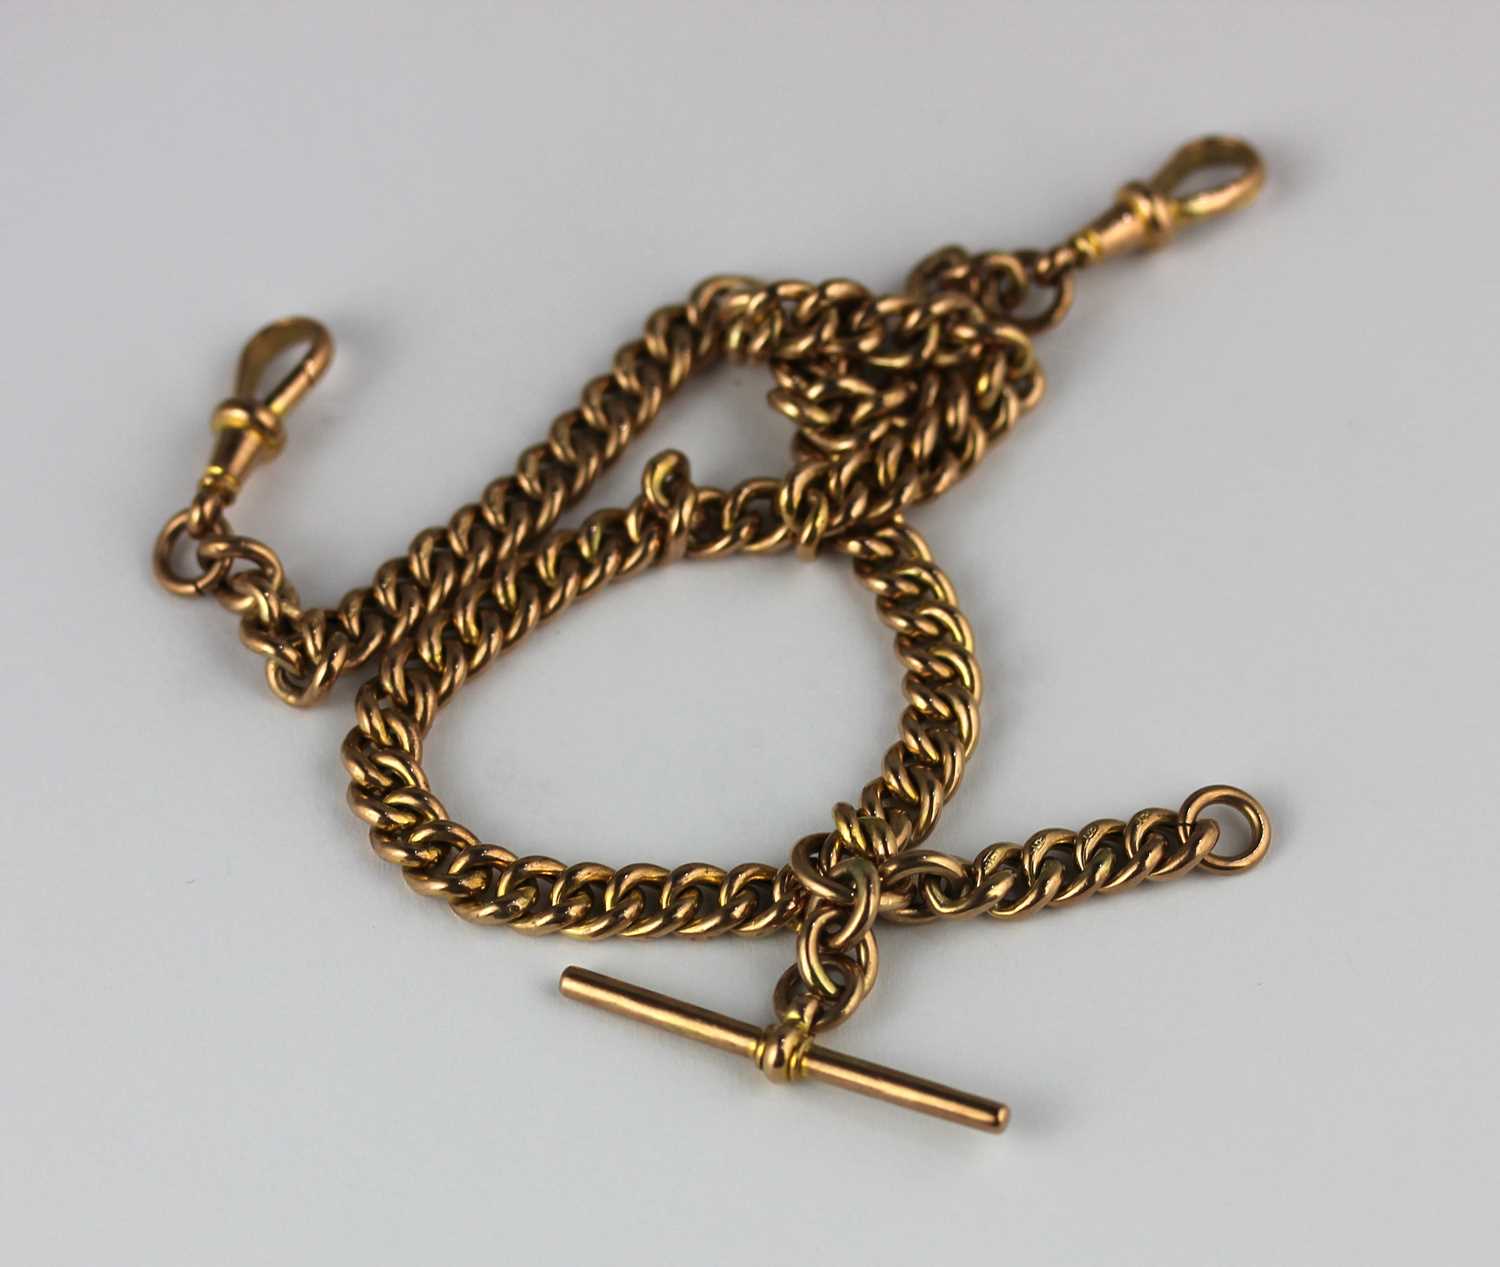 A gold hollow curb link gentleman's watch Albert chain fitted with a gold T bar and two gold swivels